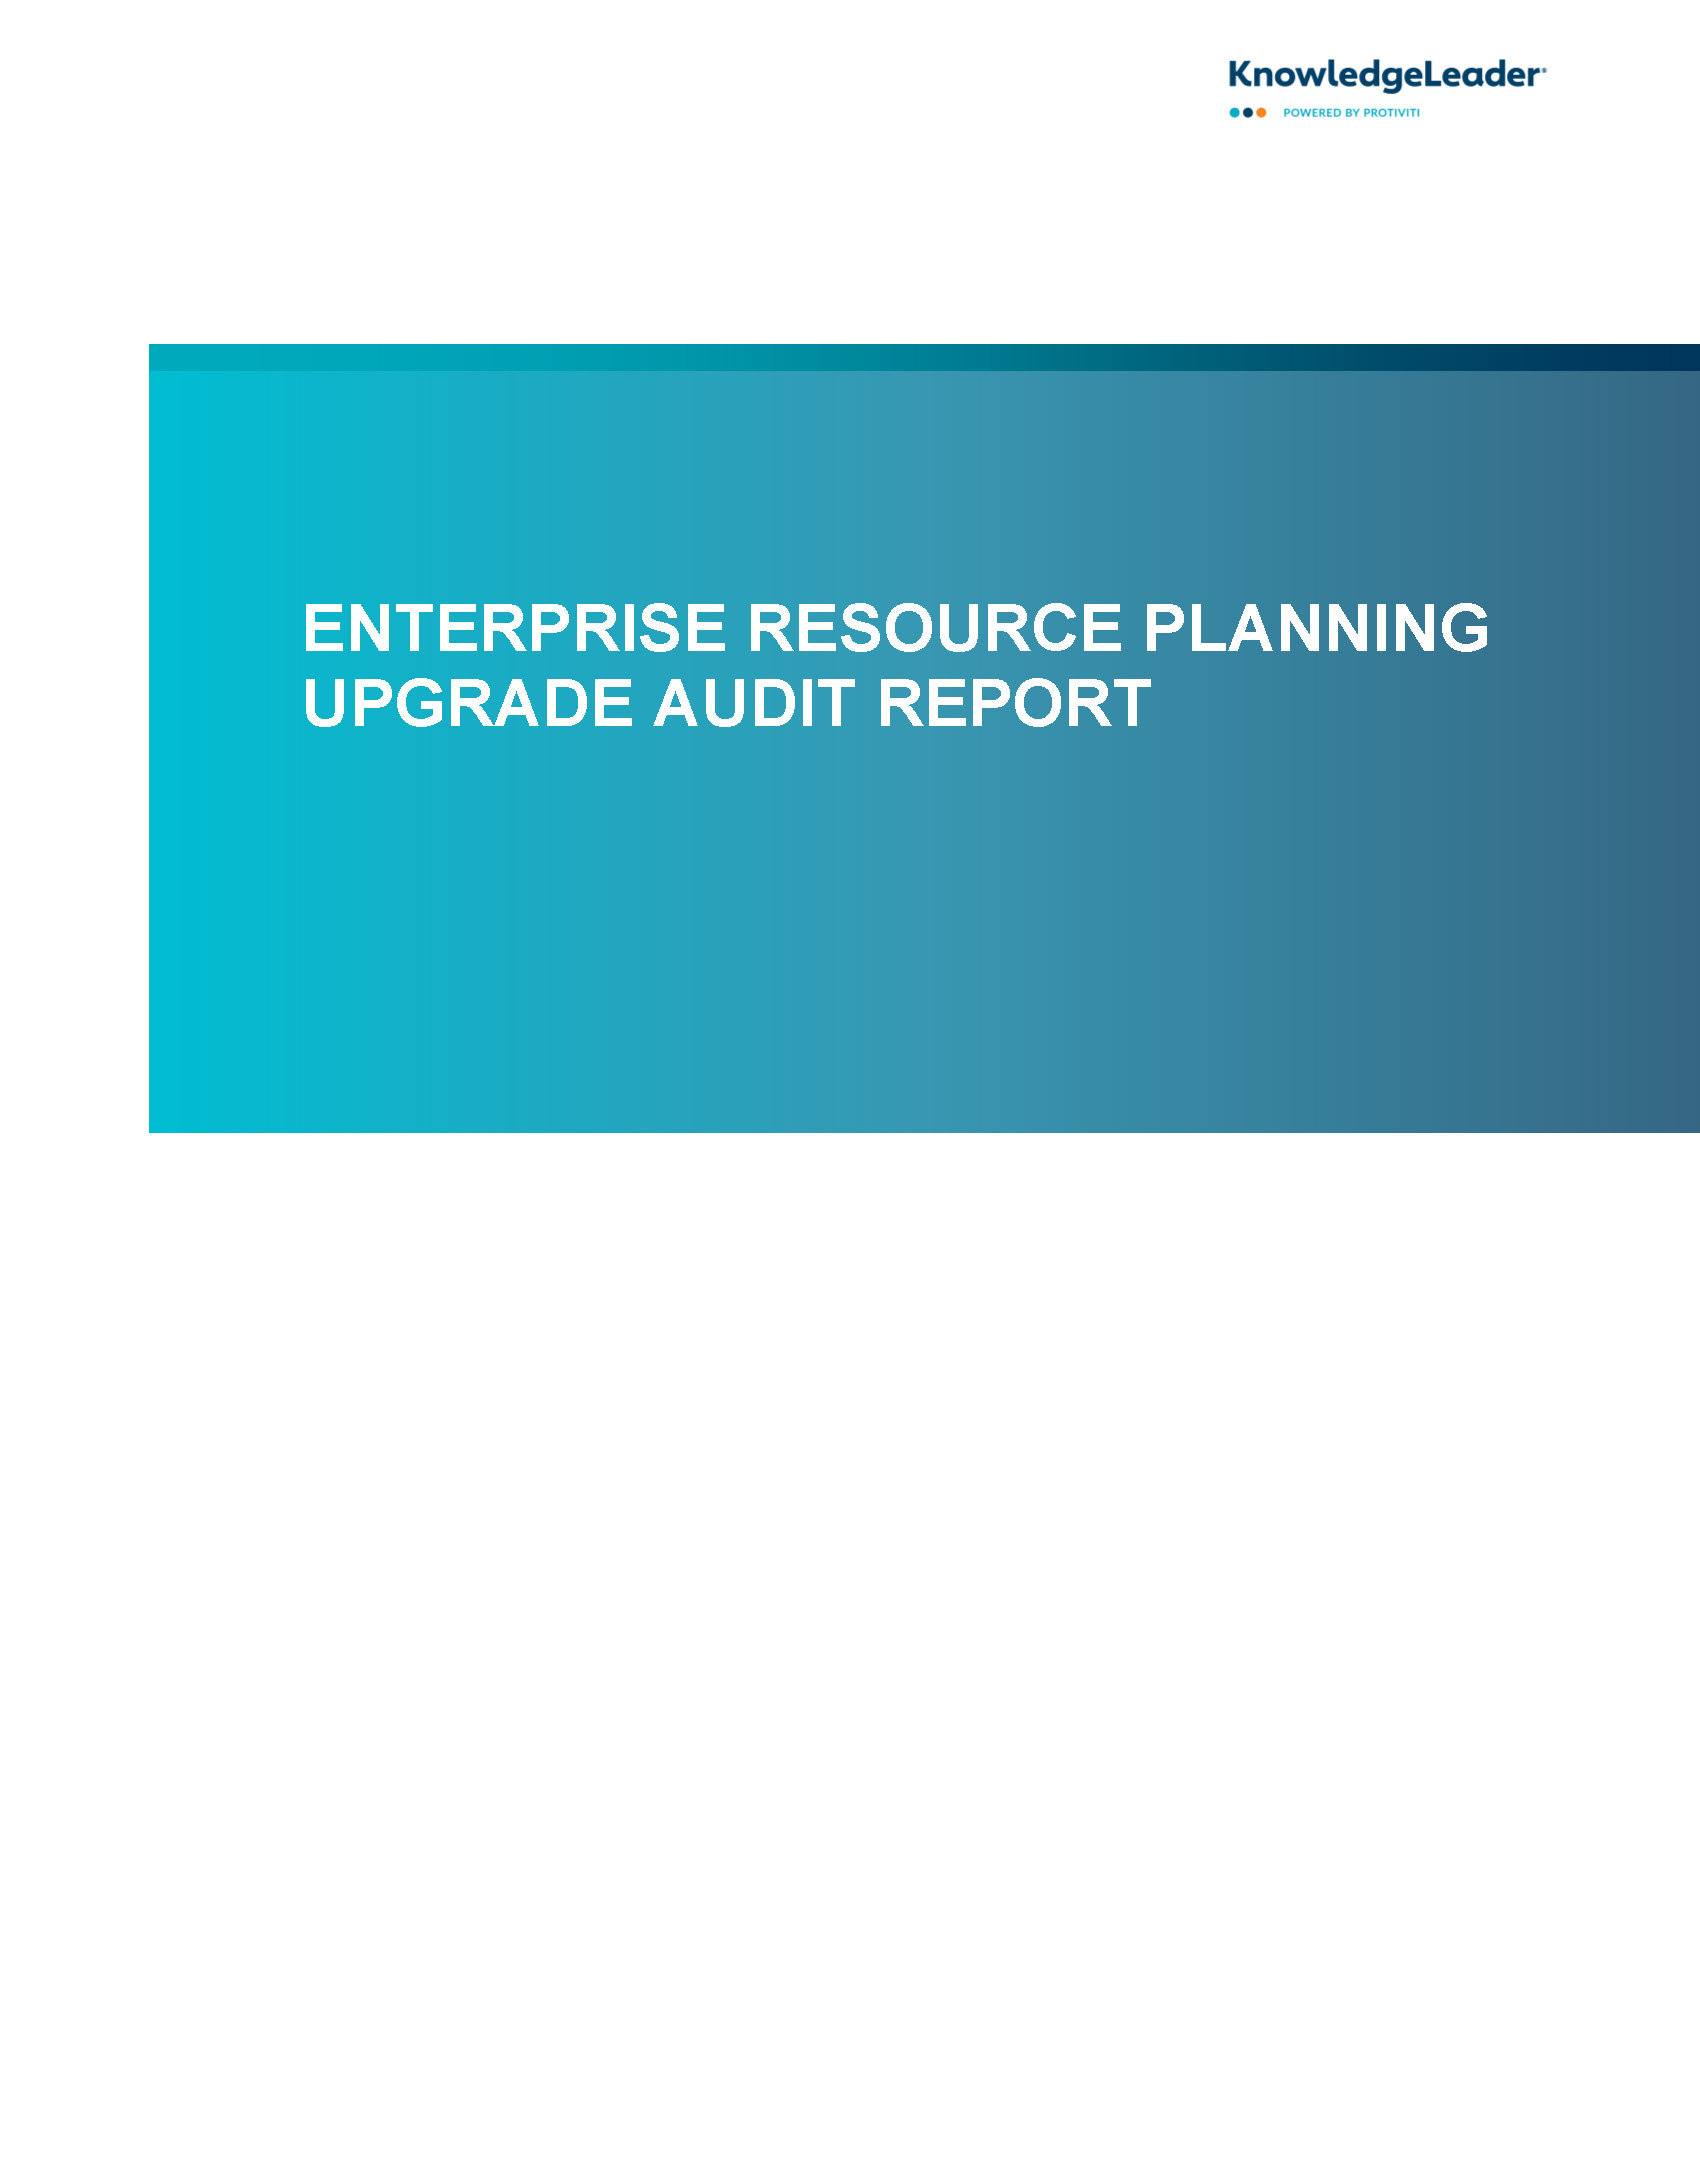 Screenshot of the first page of Enterprise Resource Planning Upgrade Audit Report